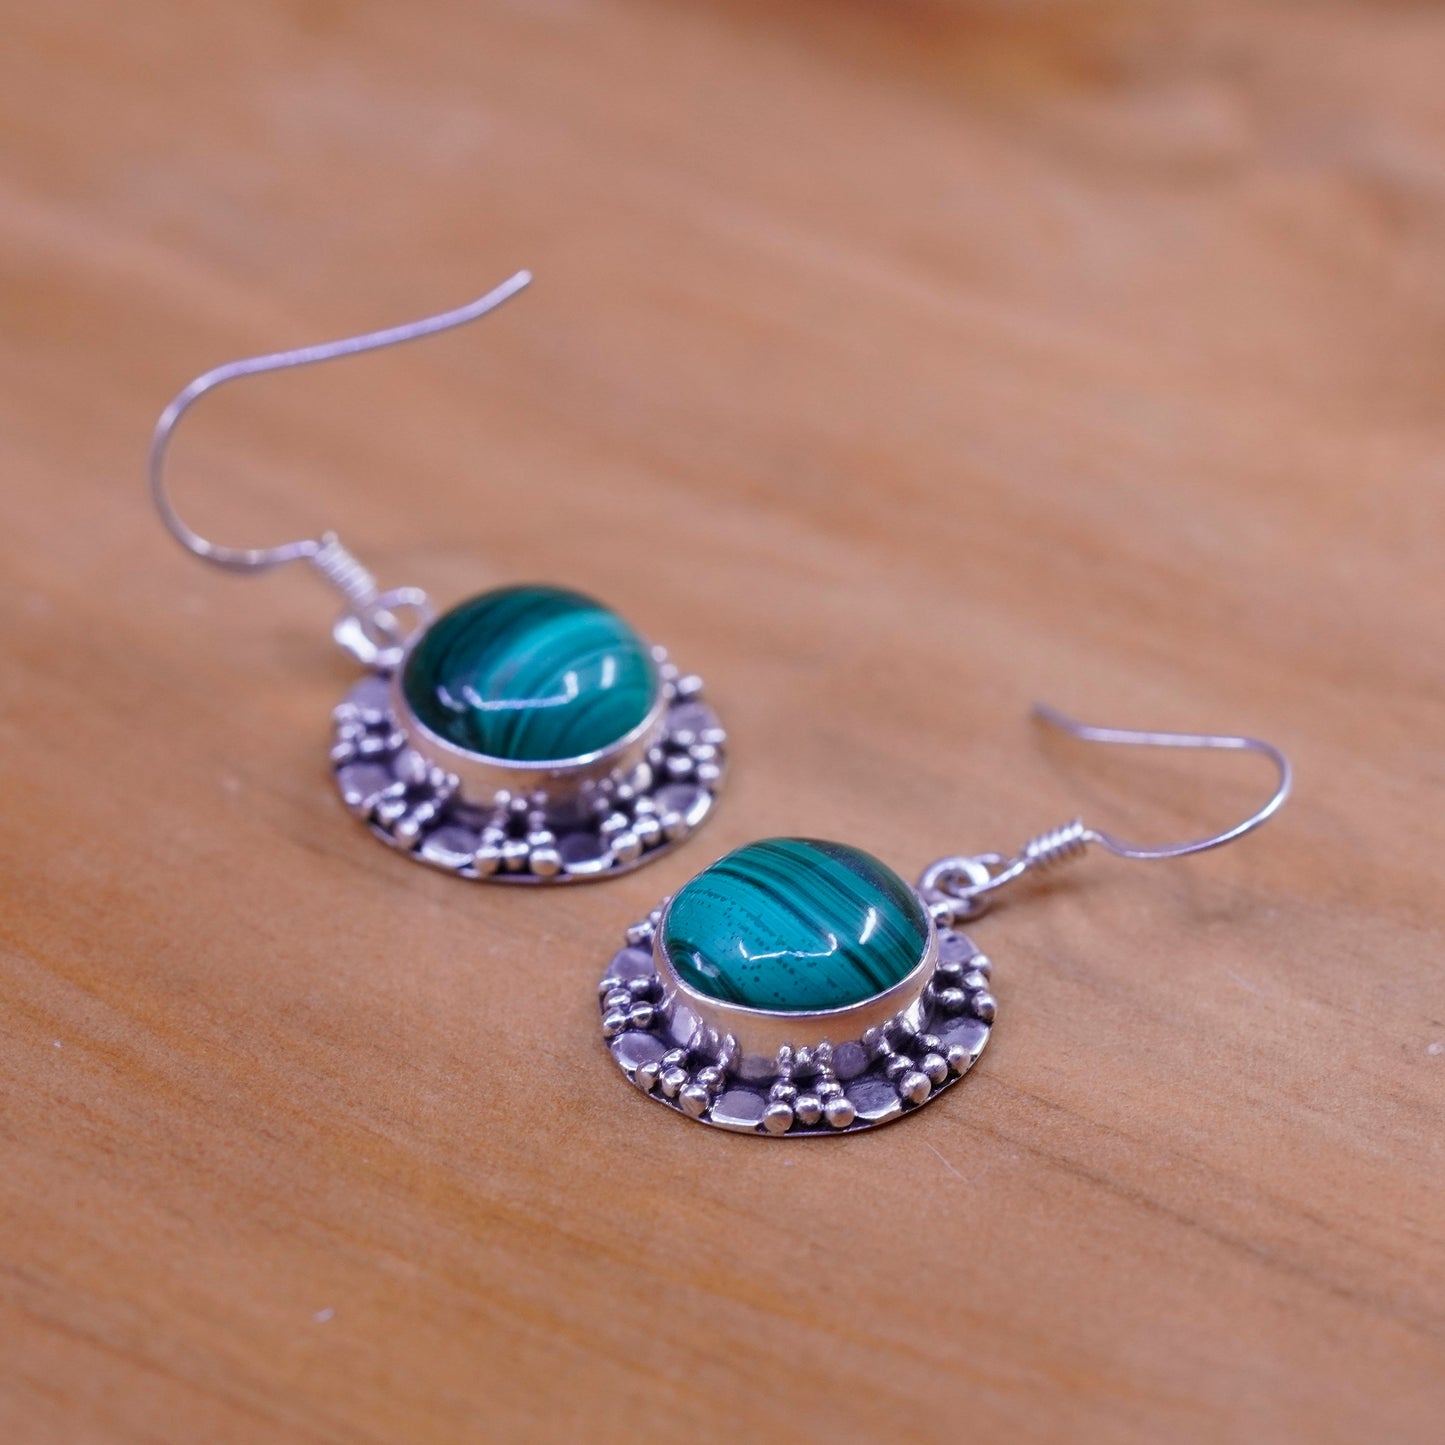 Vintage Sterling 925 silver handmade earrings with round malachite and beads